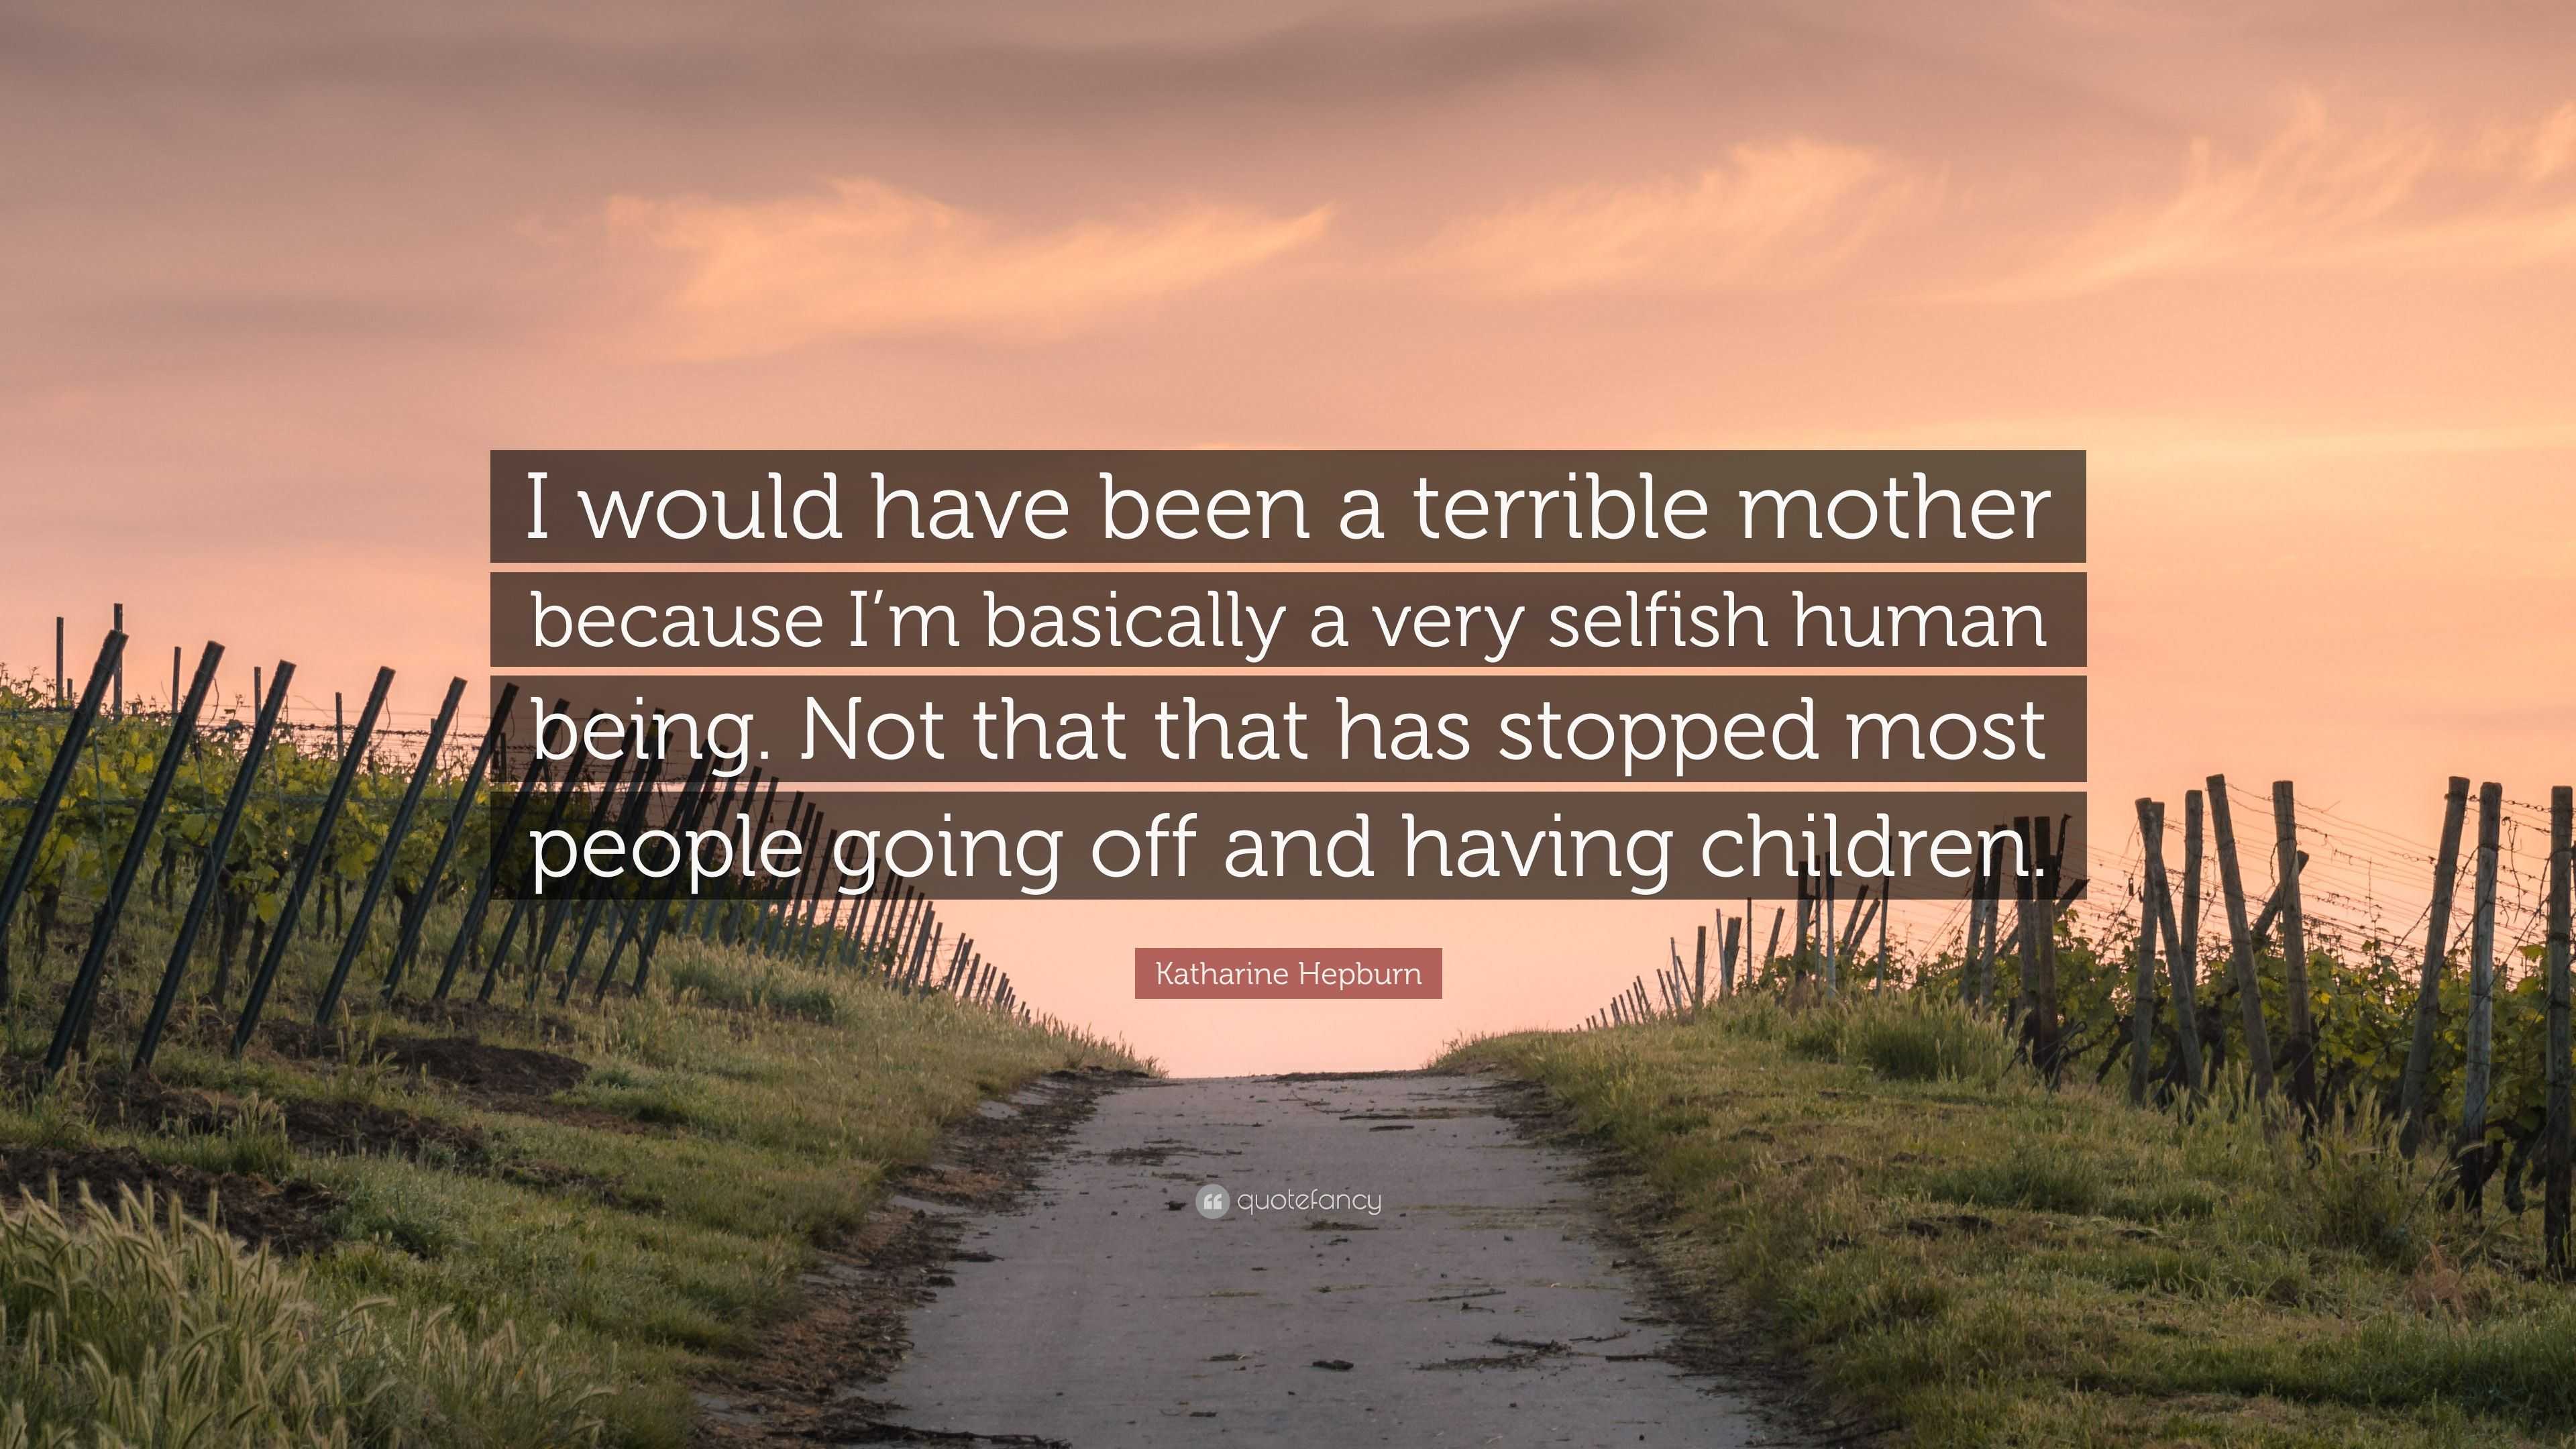 Katharine Hepburn Quote: “I would have been a terrible mother because I ...